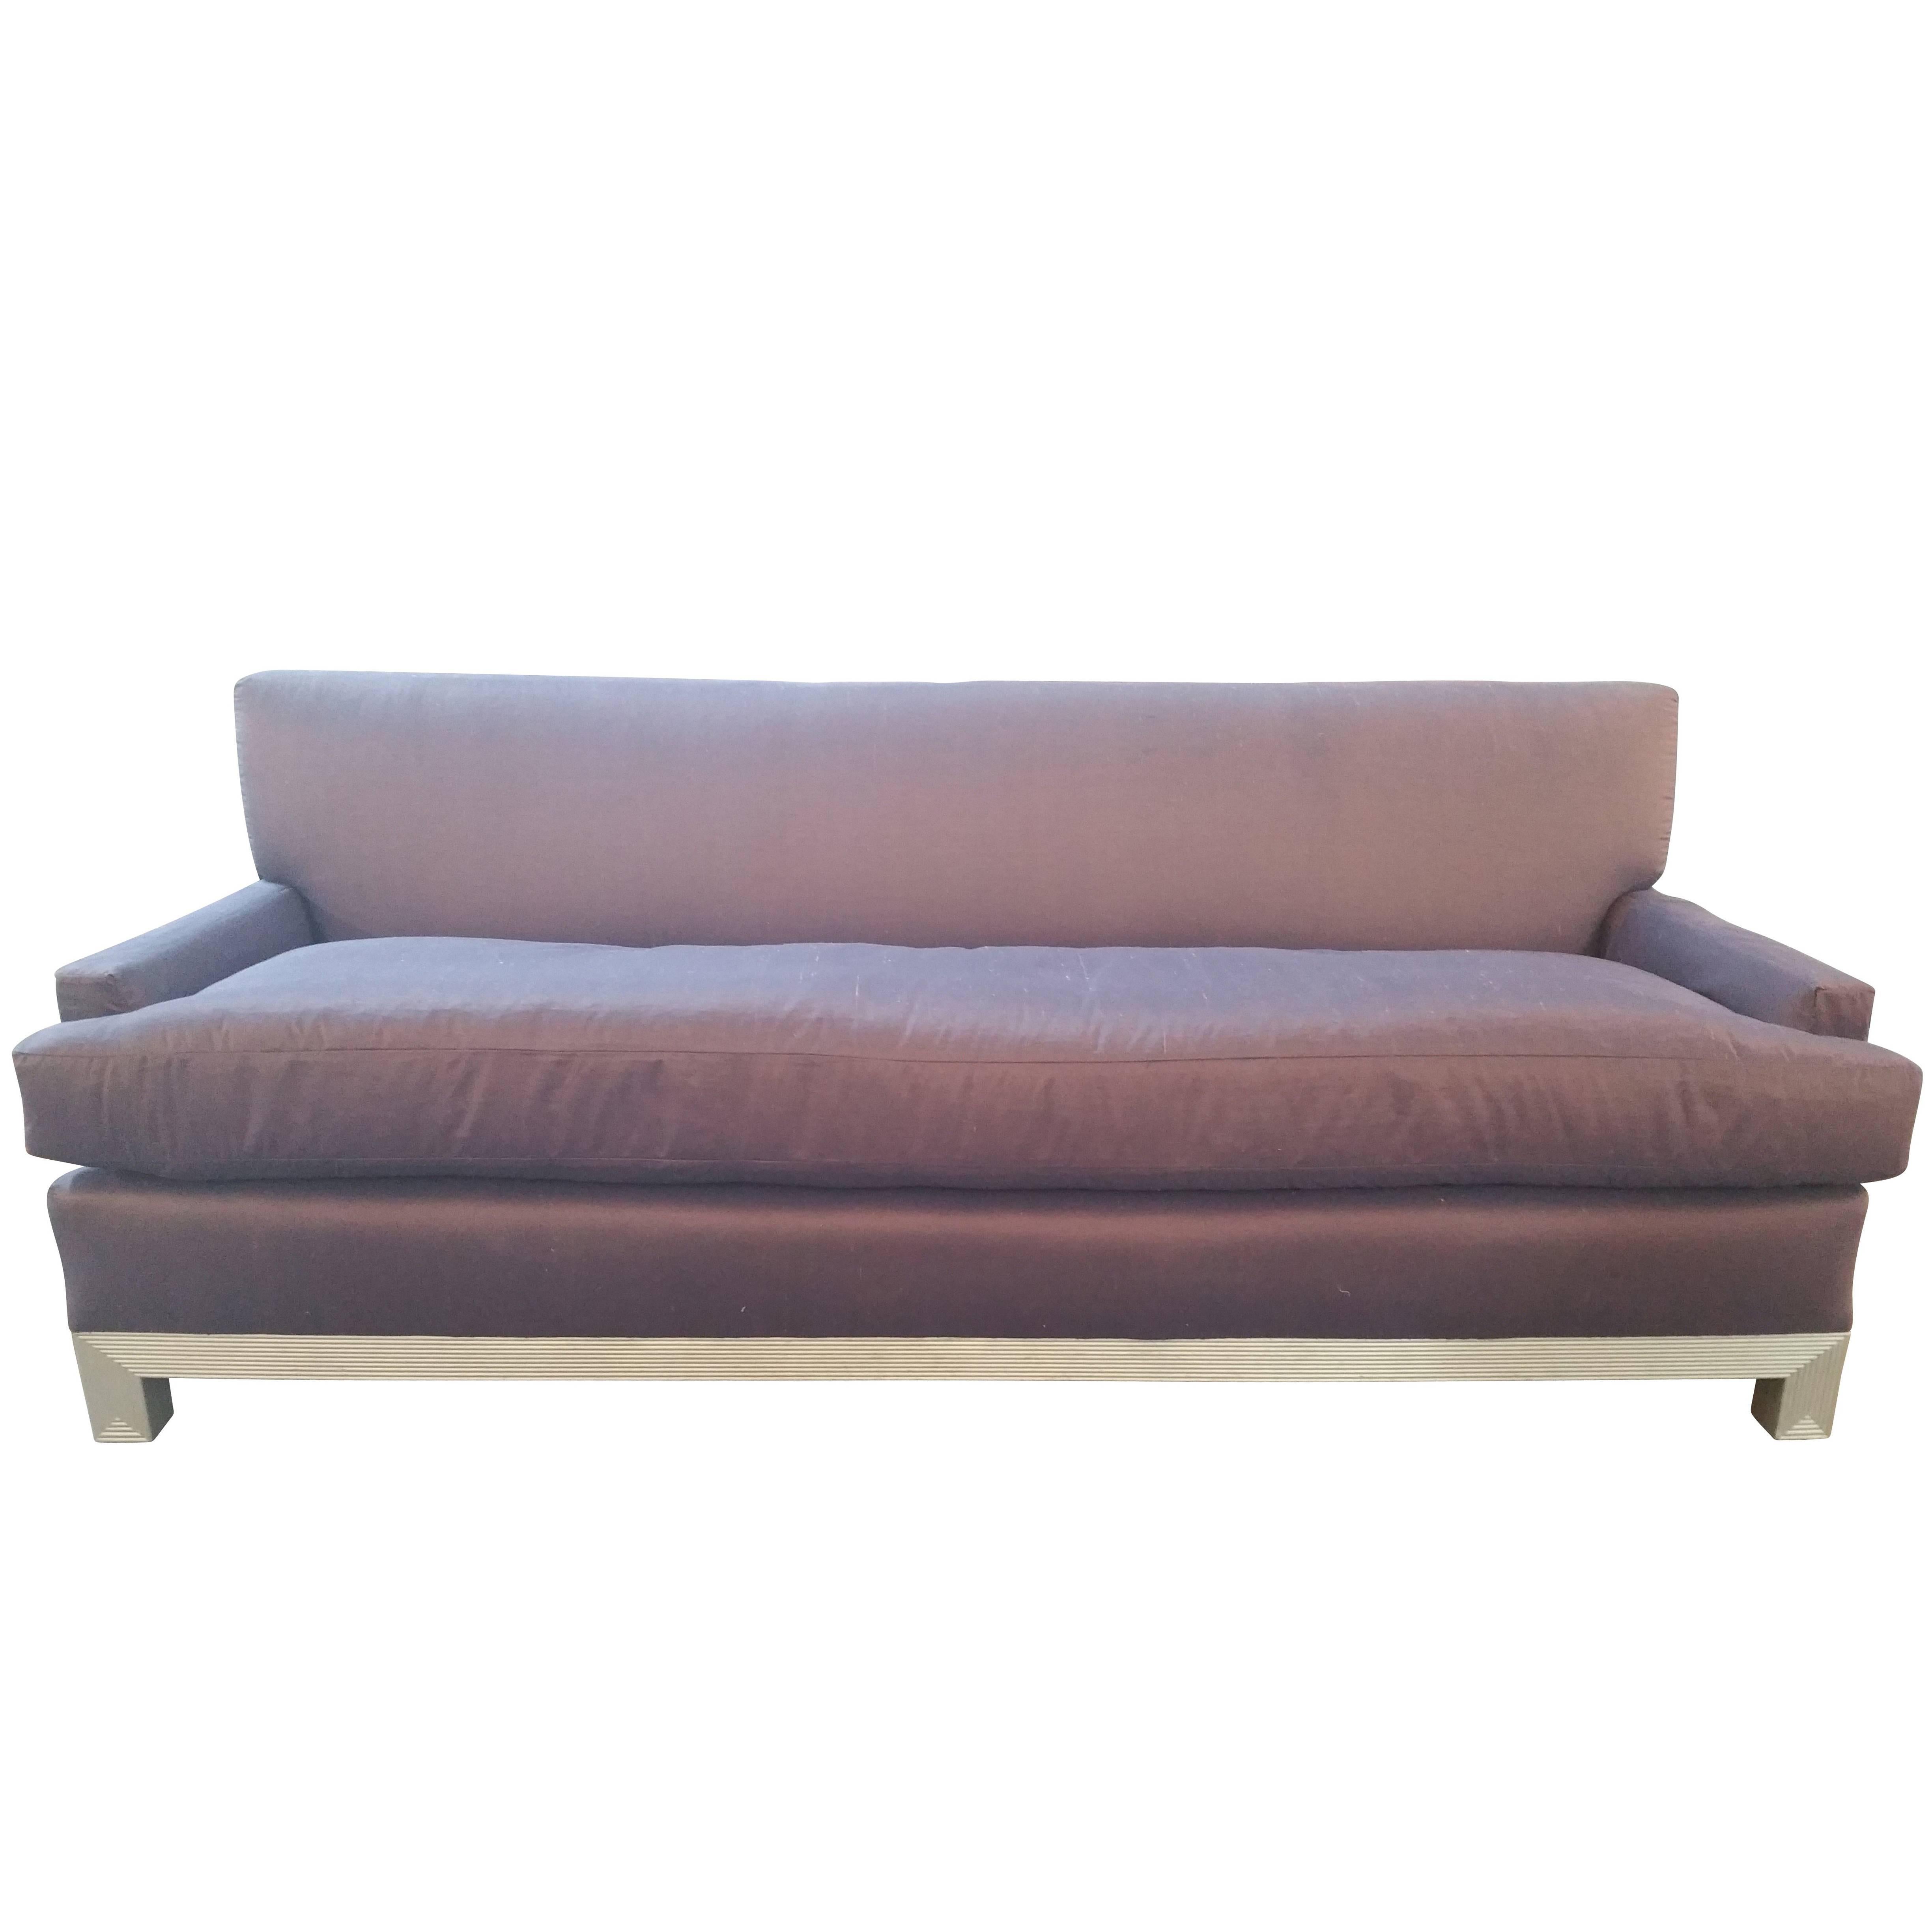 Late 1950s Iconic Sofa after Jean Michel Frank